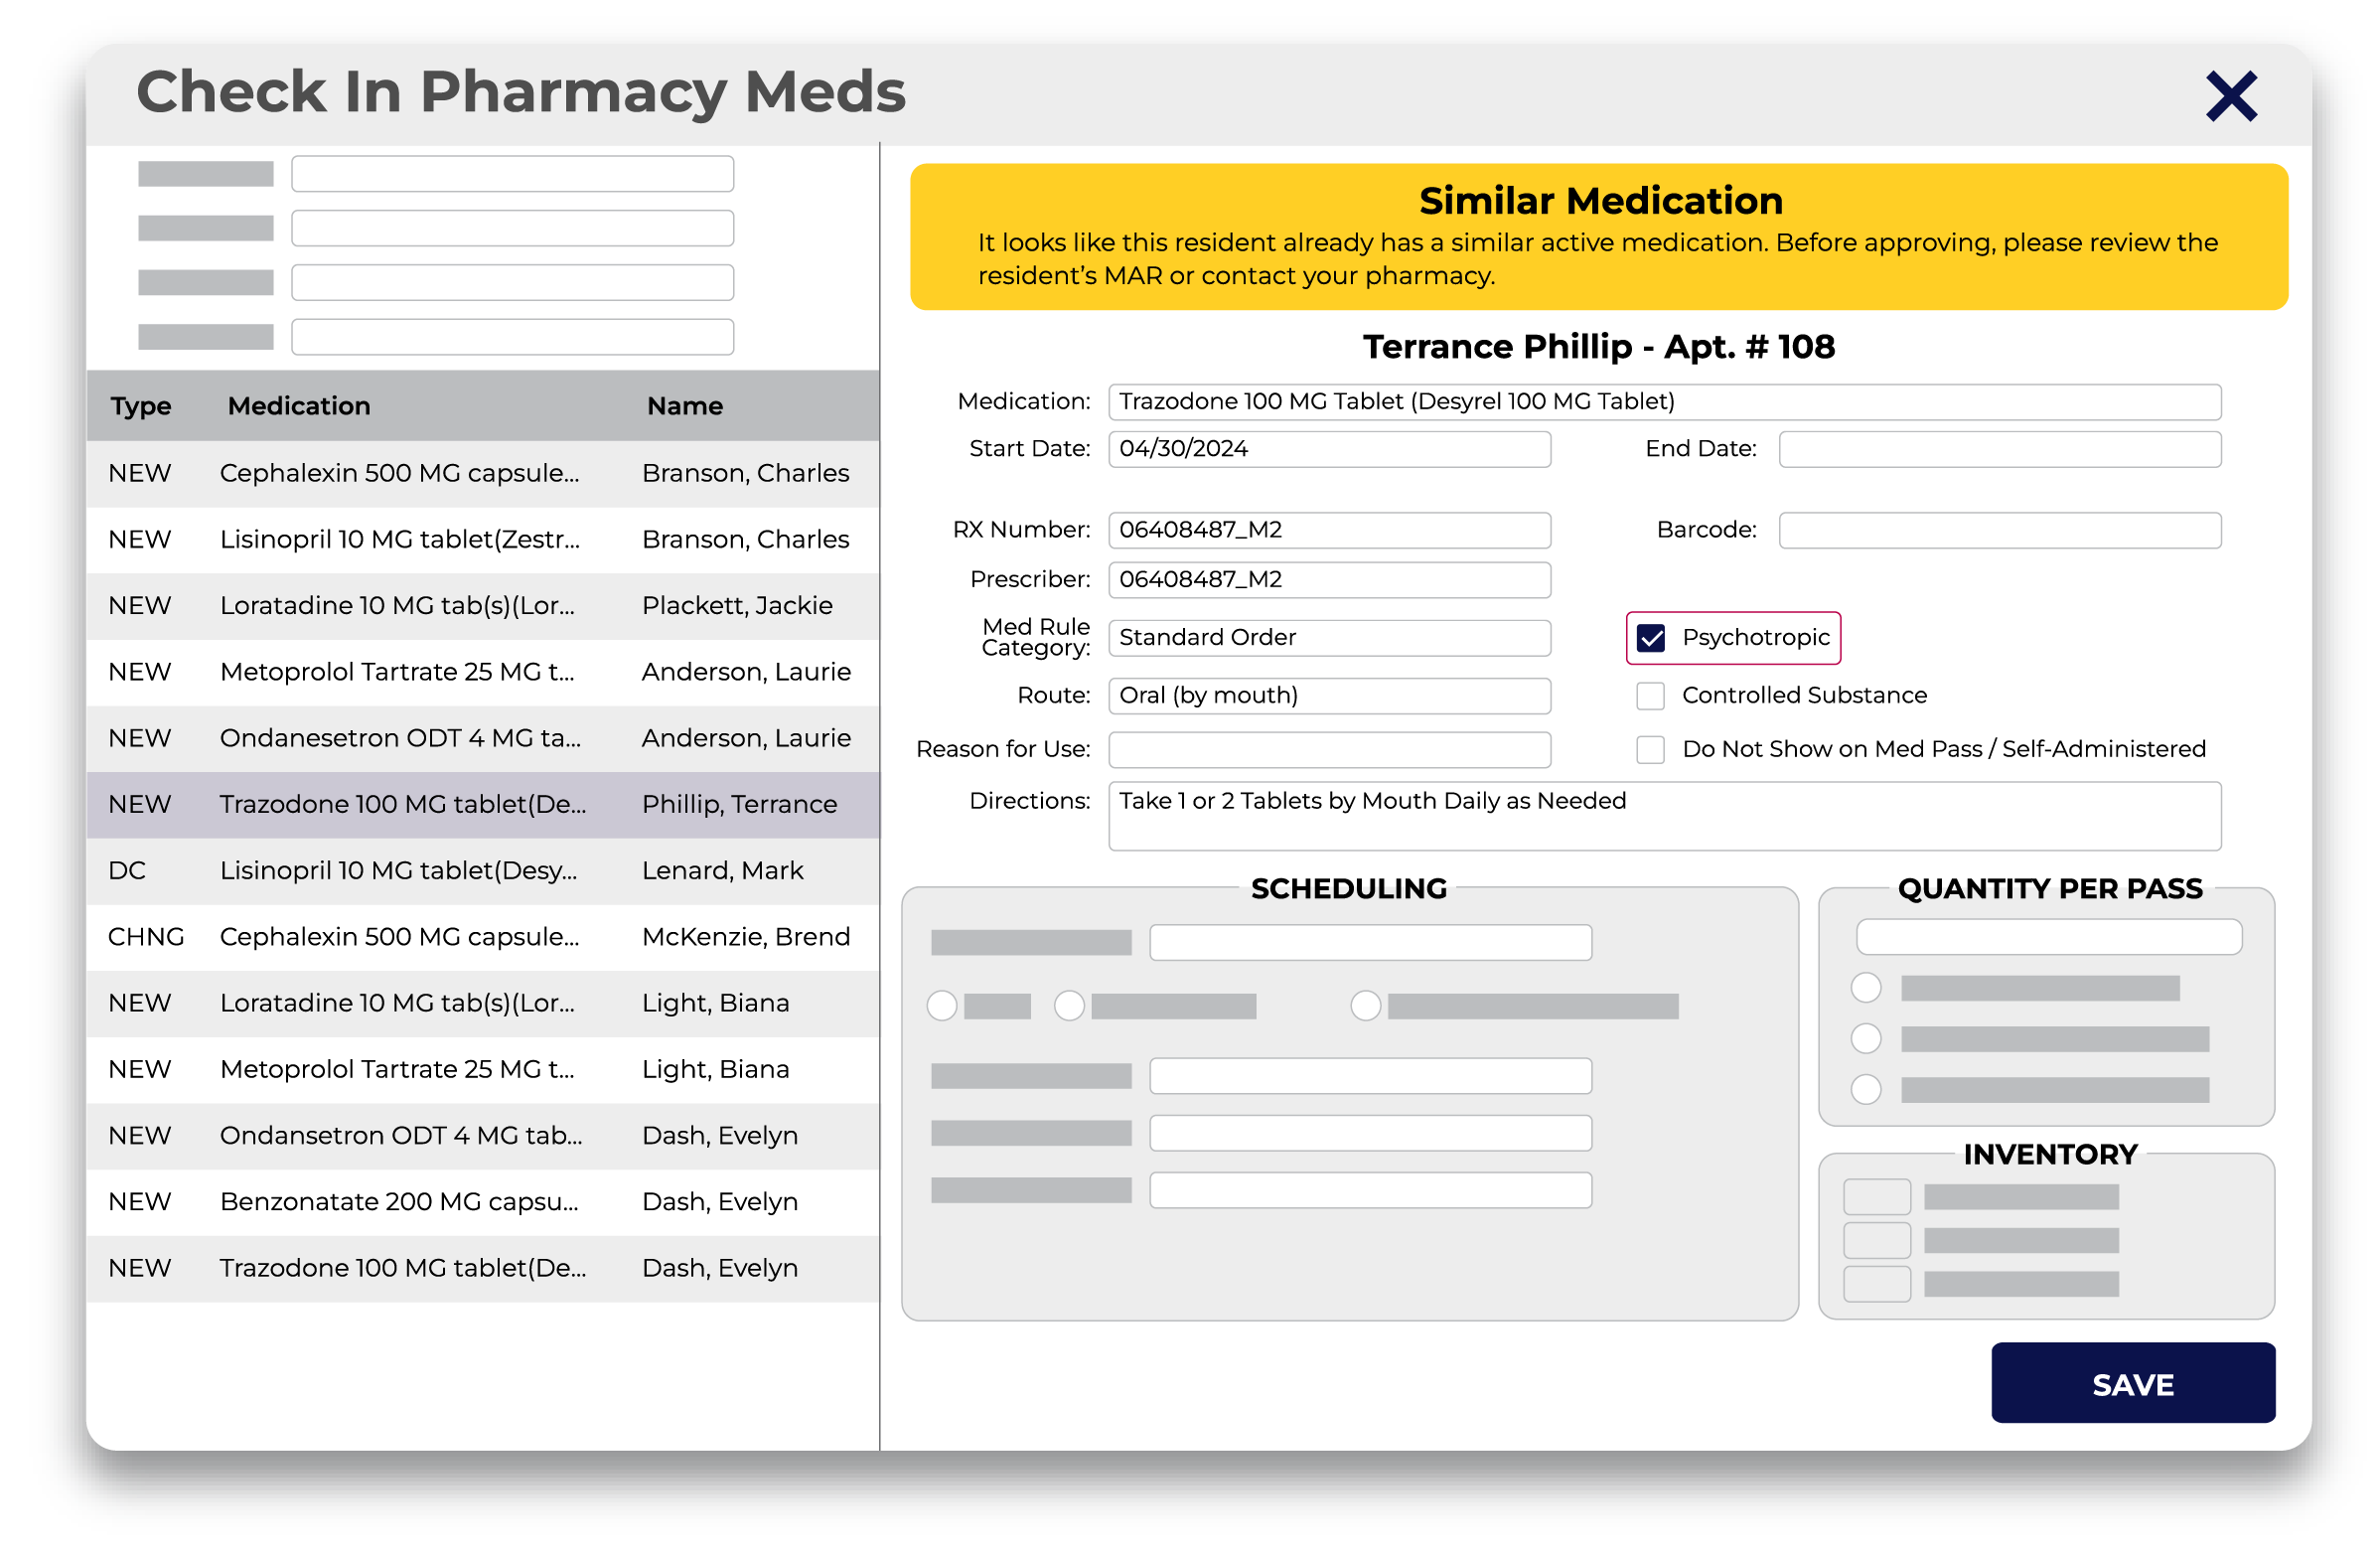 ECP AI-powered Medication Safety Feature - Check-in Meds